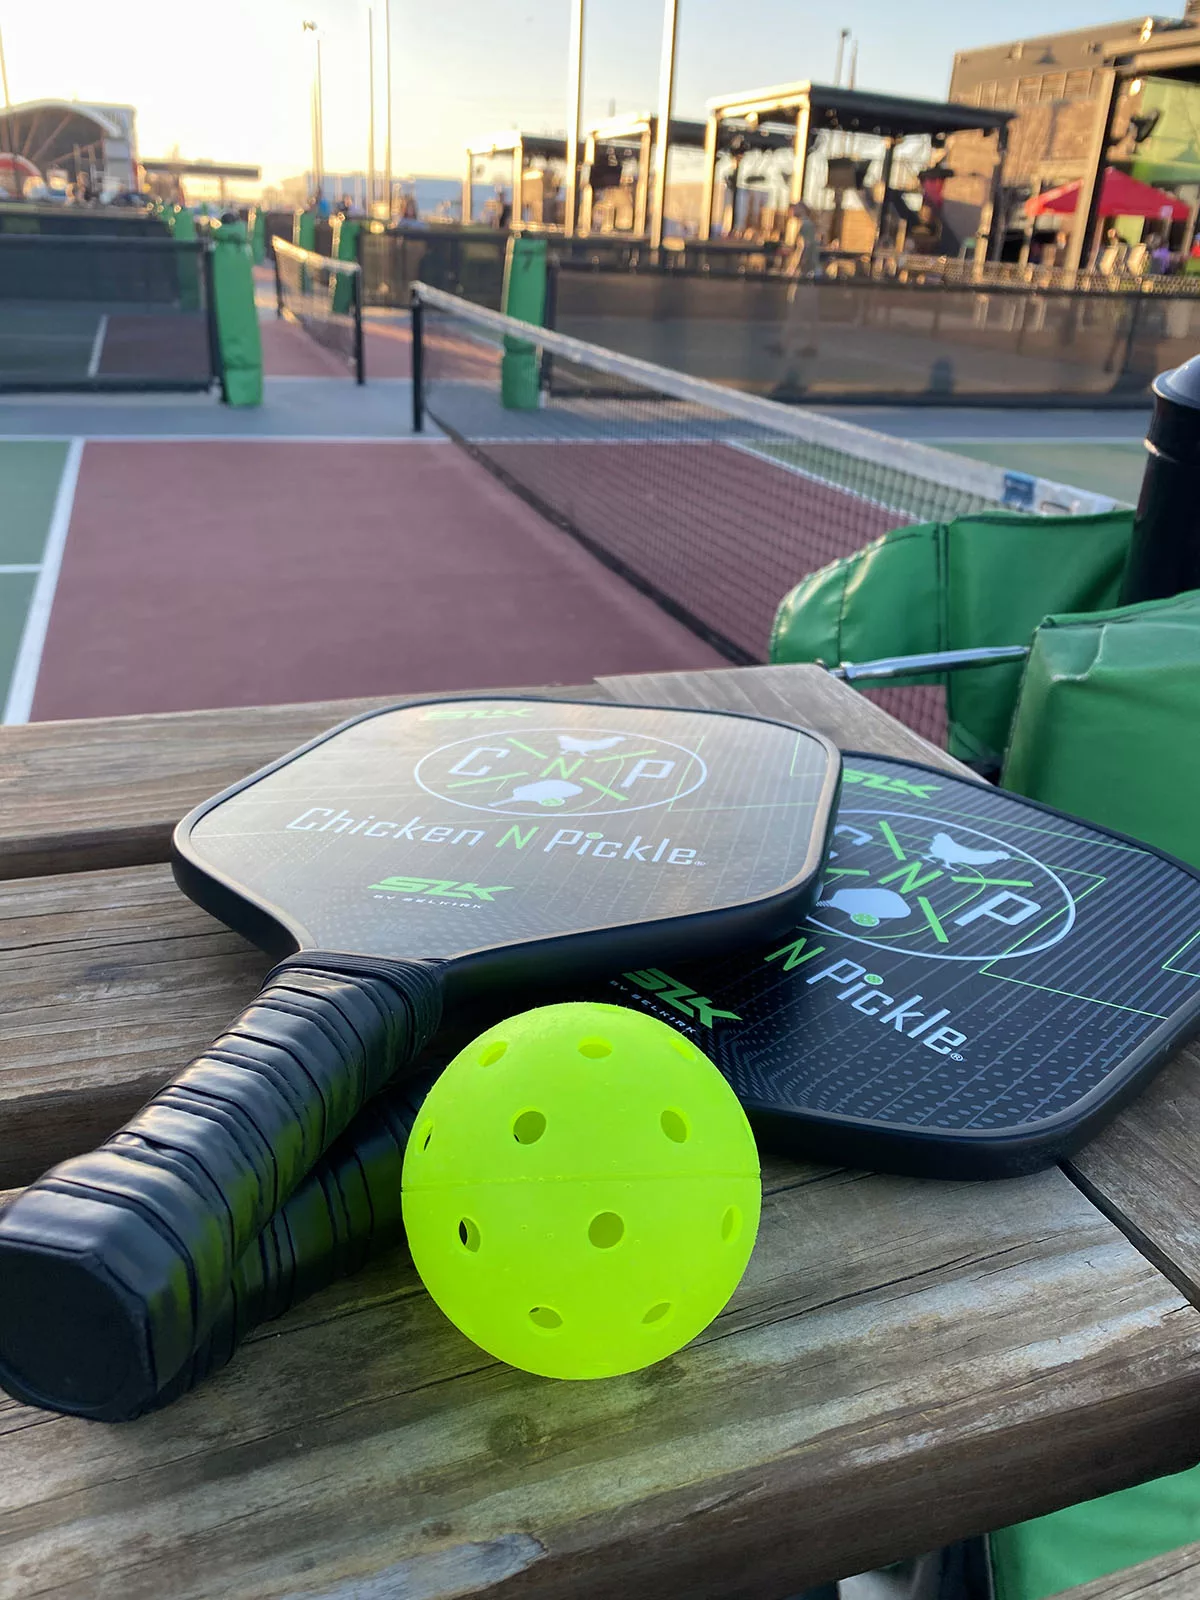 Pickle ball paddles and ball at Chicken N Pickle in Wichita, Kansas